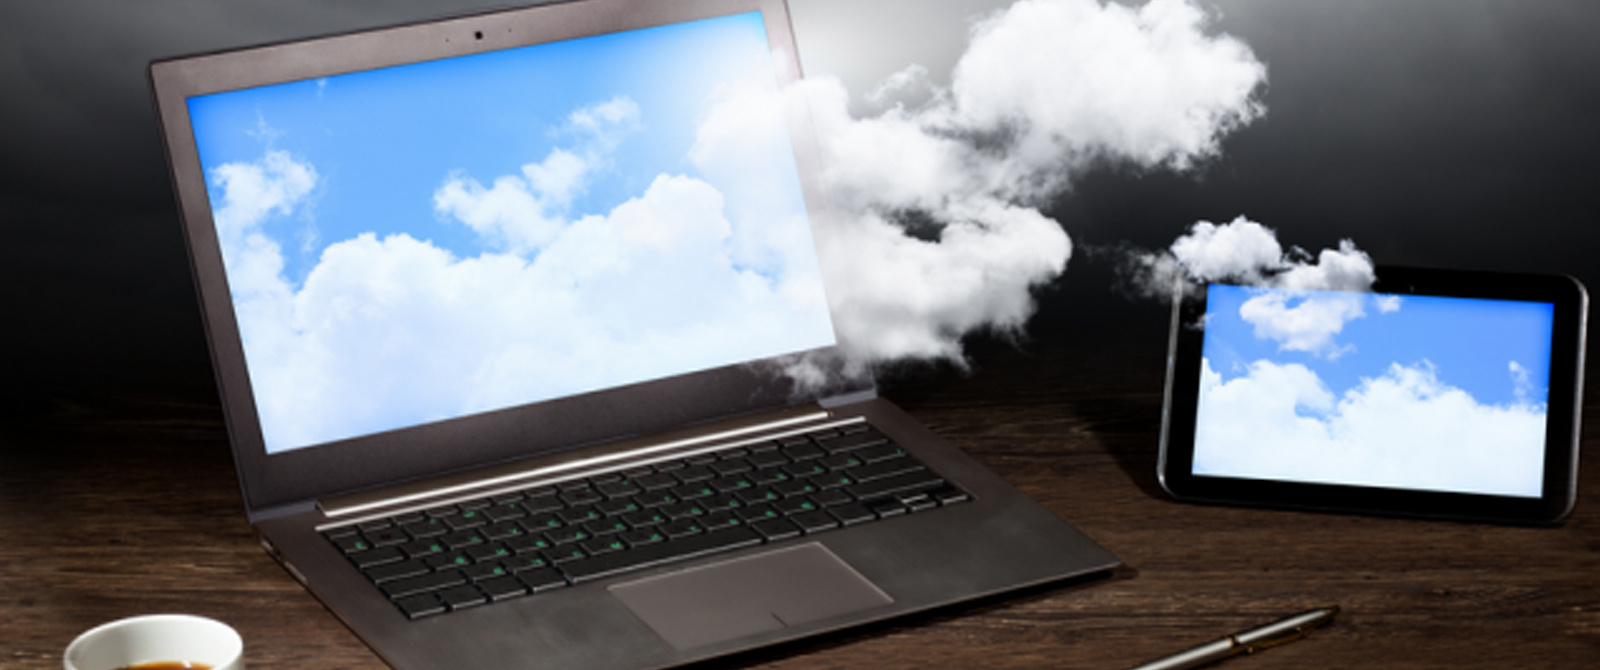 Explore The CLOUDs With Our Advanced Software